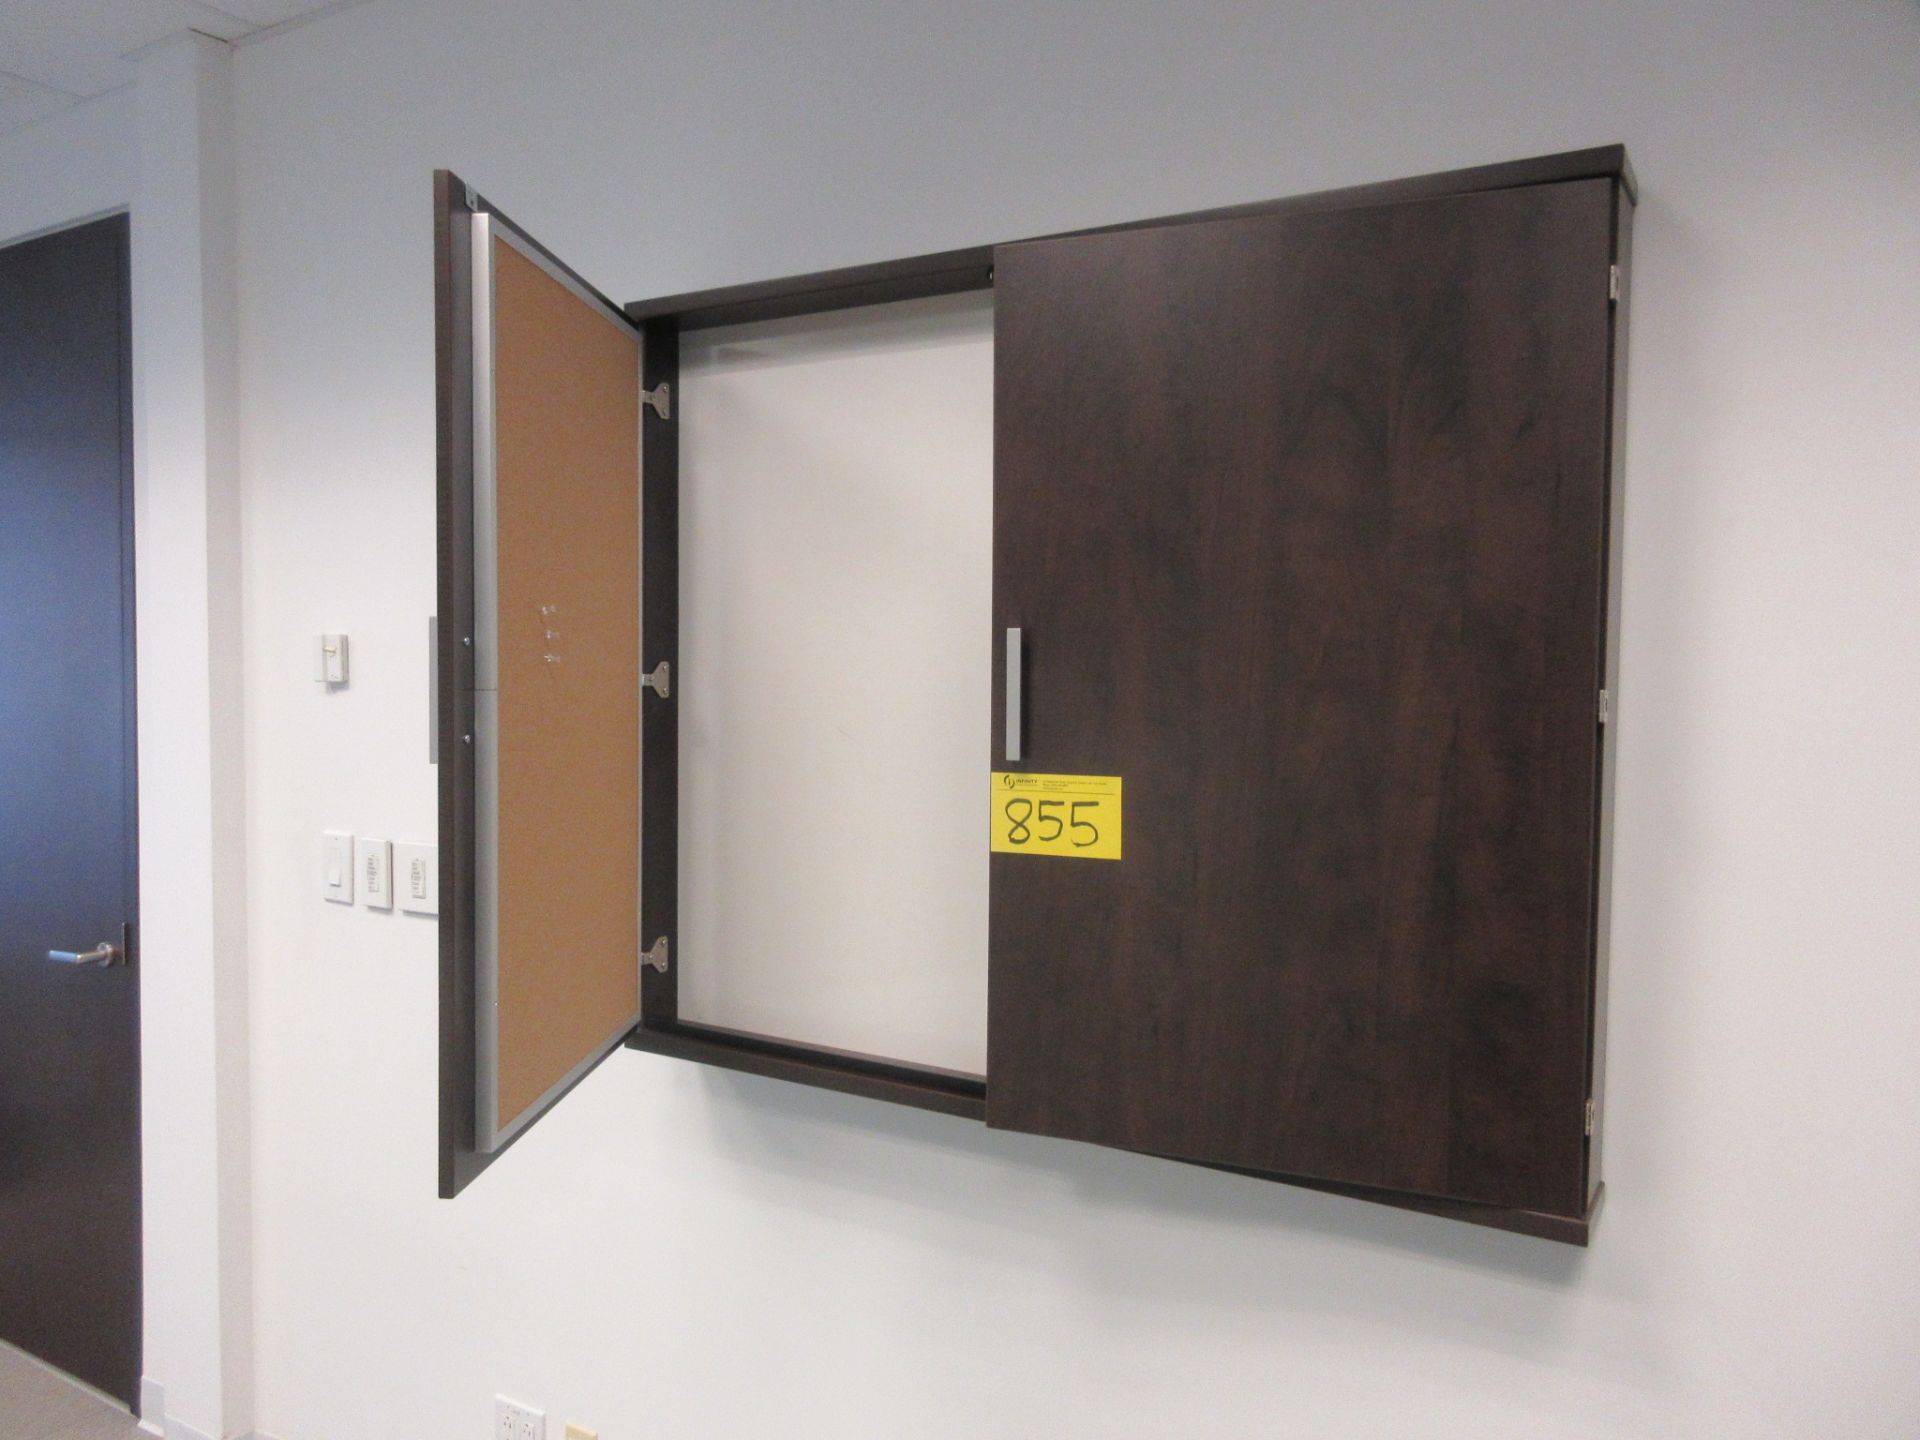 2-DRAWER / 2-DOOR CABINET W/ WALL MOUNTED WHITEBOARD / CORKBOARD CABINET (FRONT OFFICES) (SUBJECT TO - Image 4 of 4